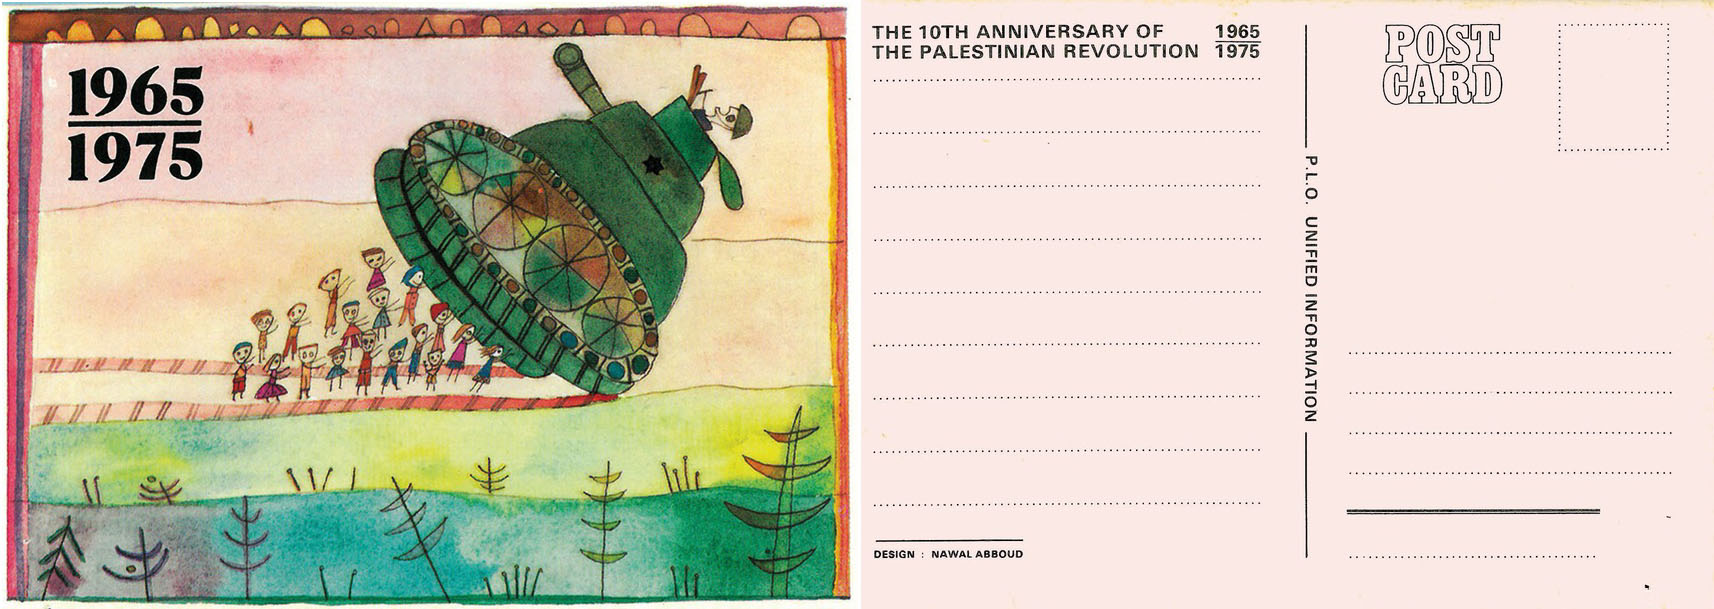 a postcard designed Nawal Traboulsi showing kids turning a military tank over 